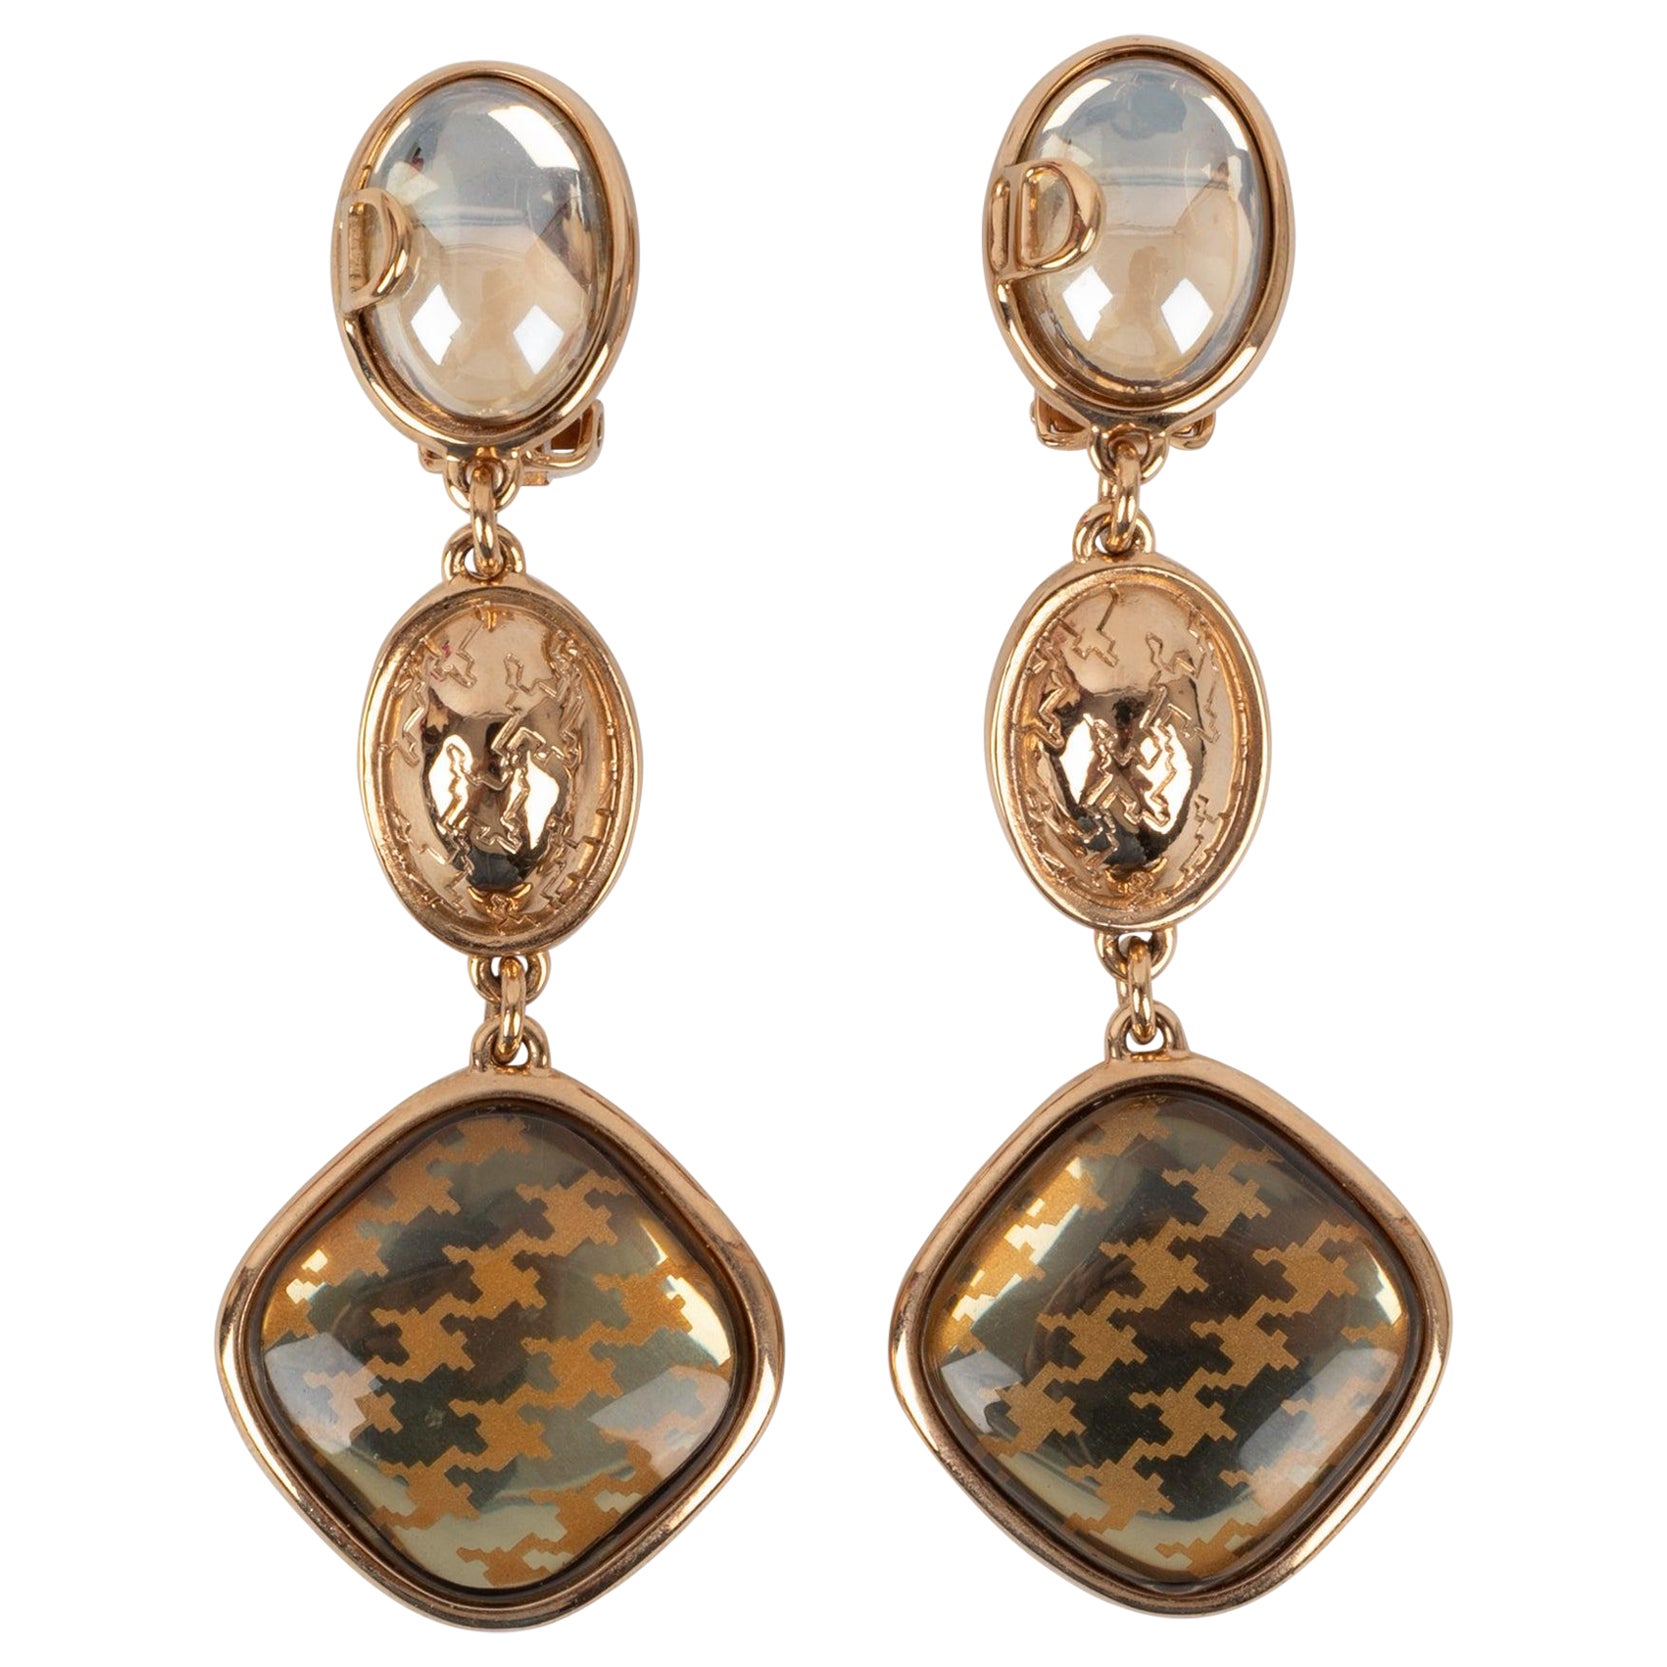 Christian Dior Golden Metal Clip-on Earrings with Resin and Glass Cabochons